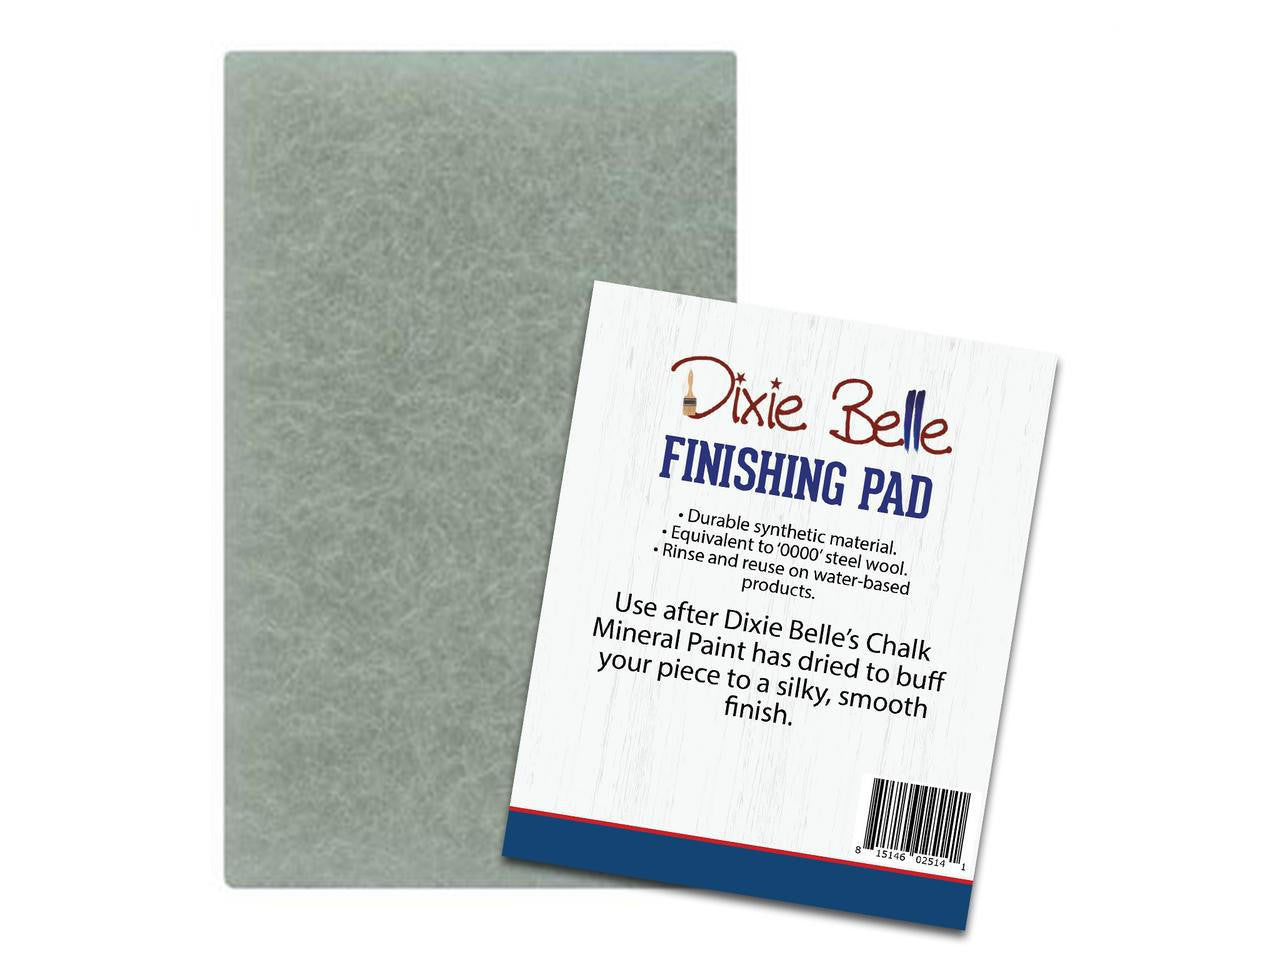 Finishing Pad by Dixie Belle